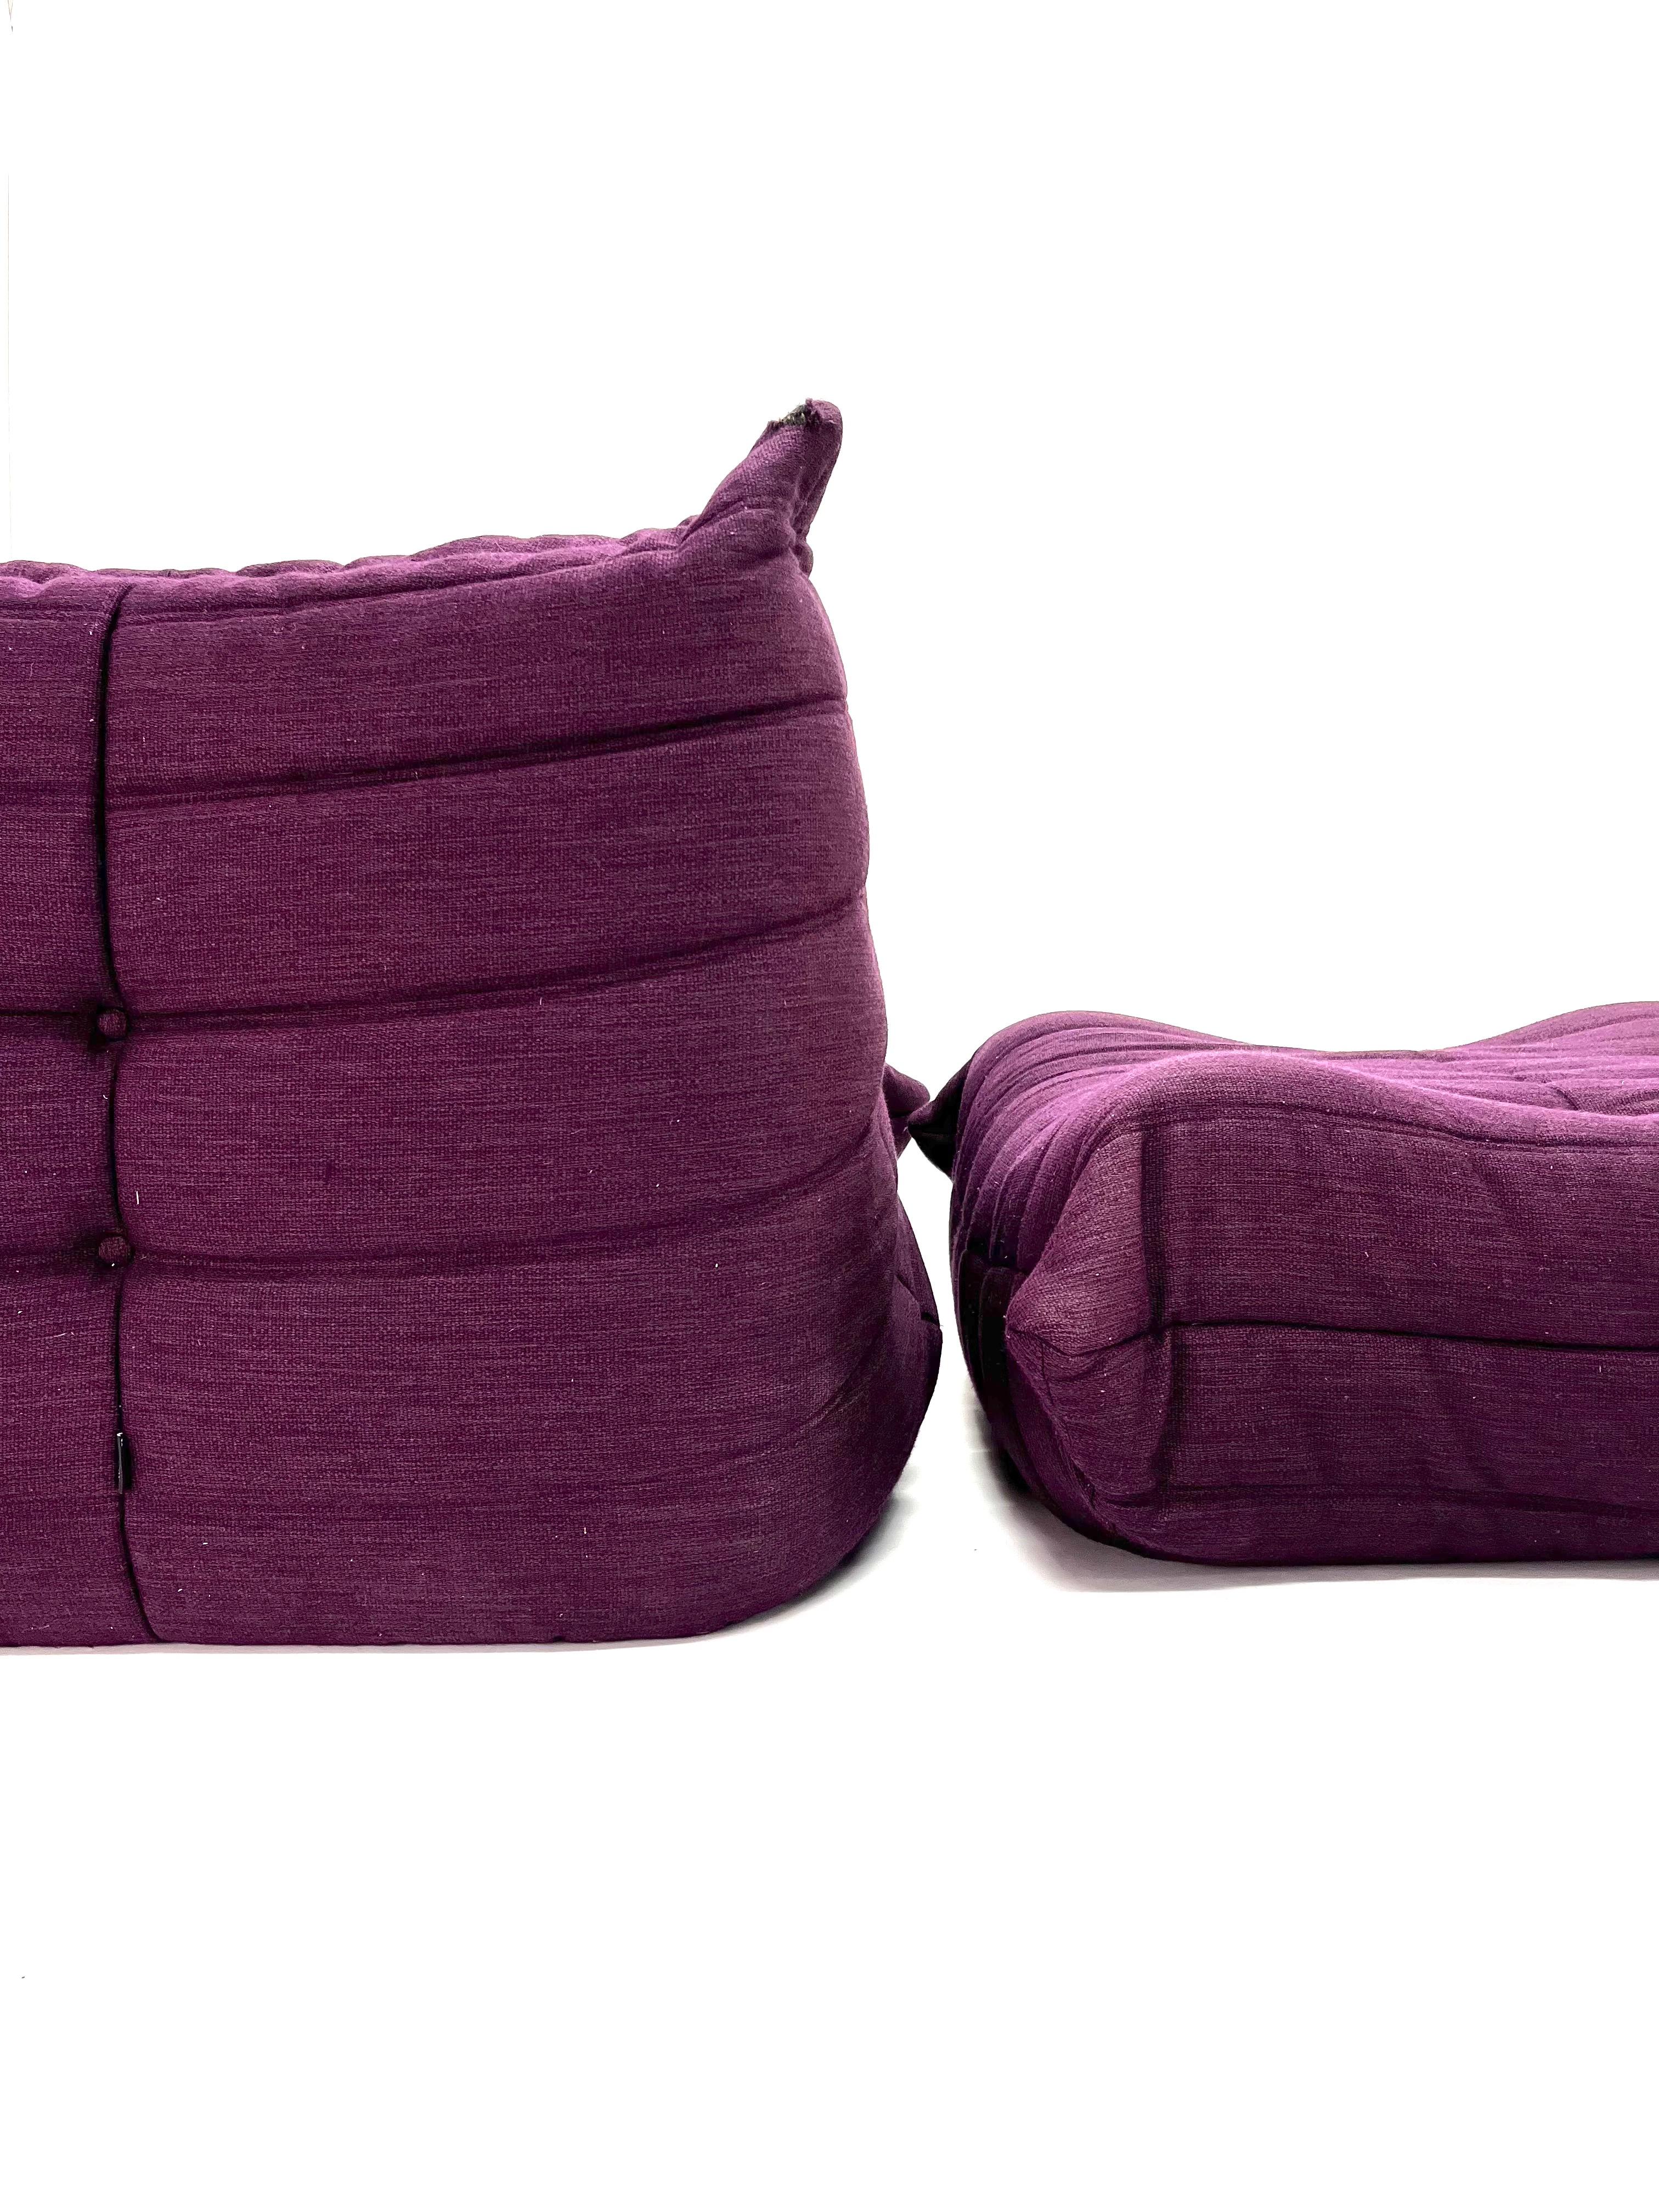 Togo Chair and Ottoman in Purple by Michel Ducaroy for Ligne Roset For Sale 8